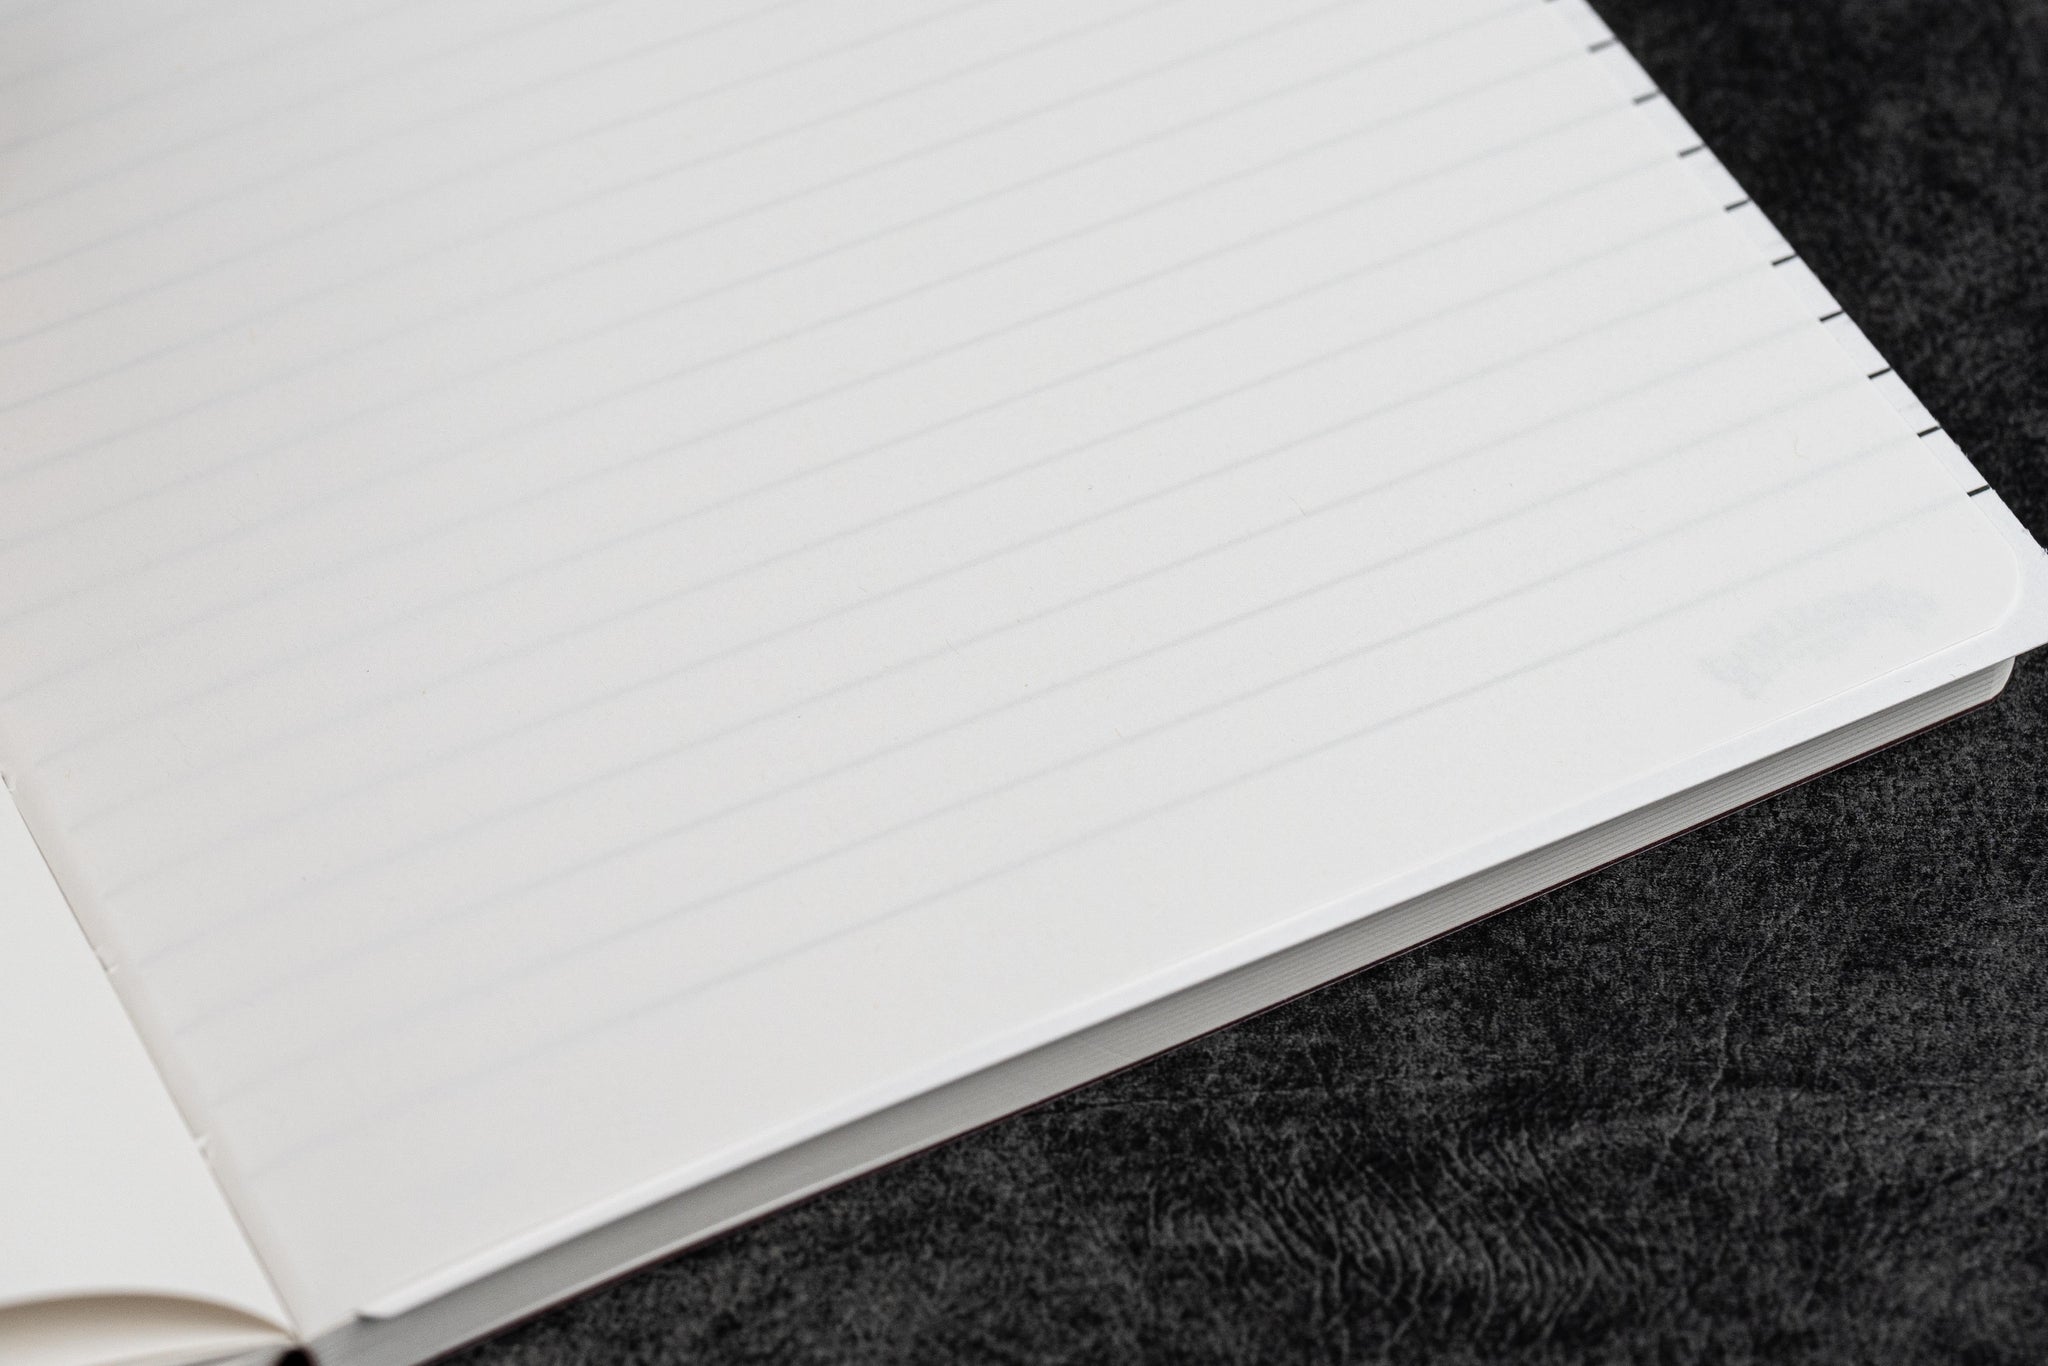 A5 Blank Paper Notebook - Set of 2